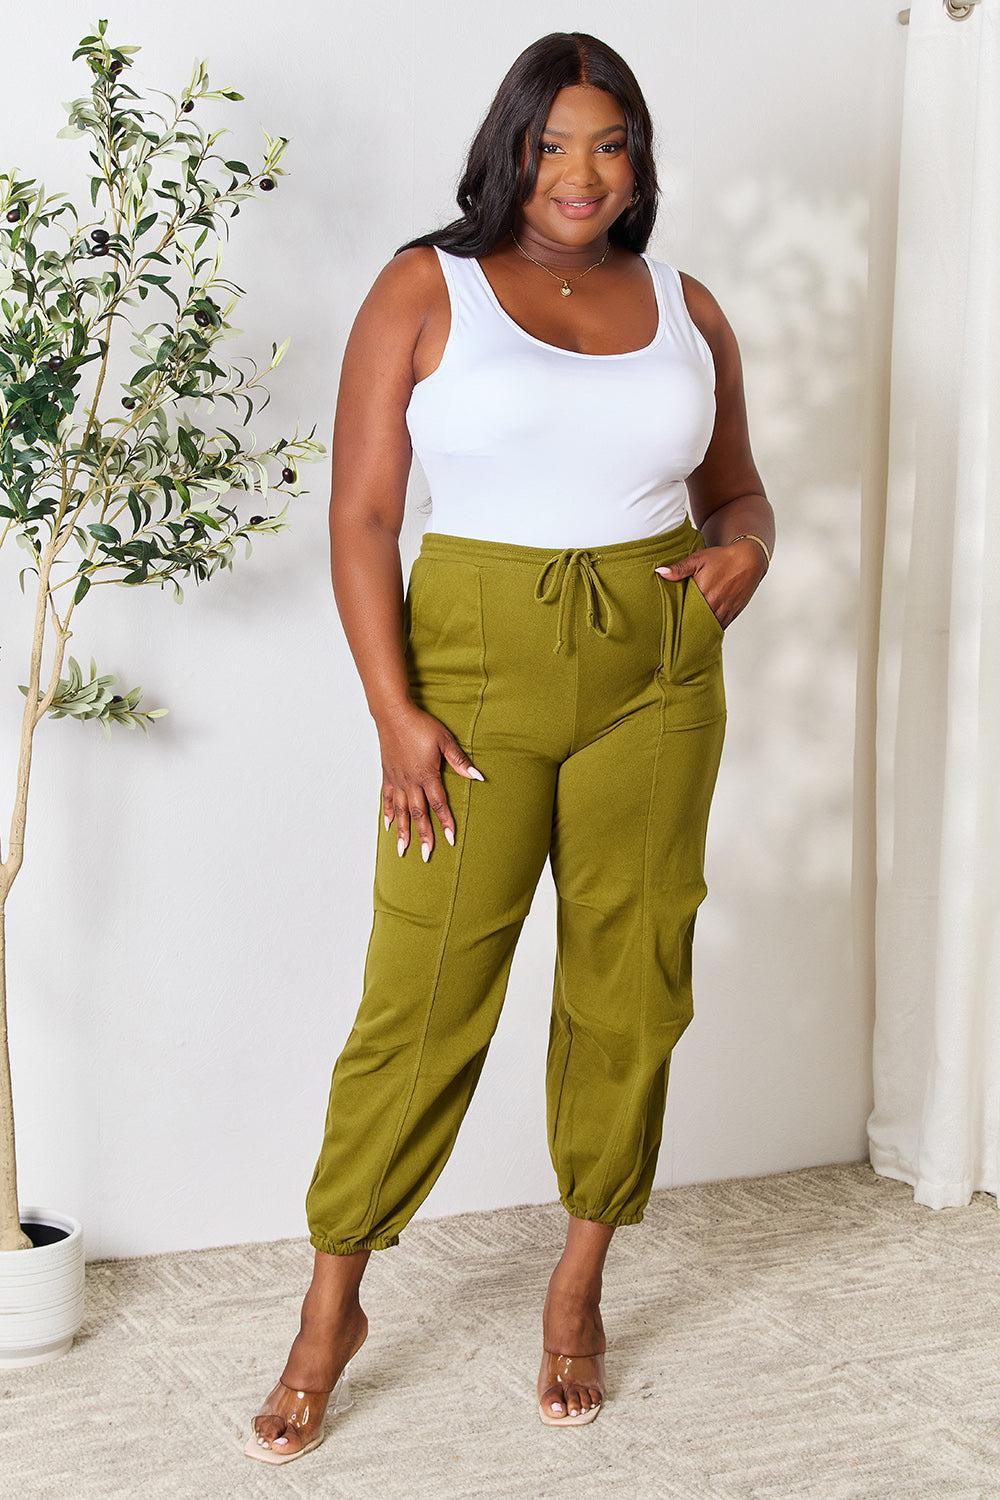 a woman in a white tank top and green pants